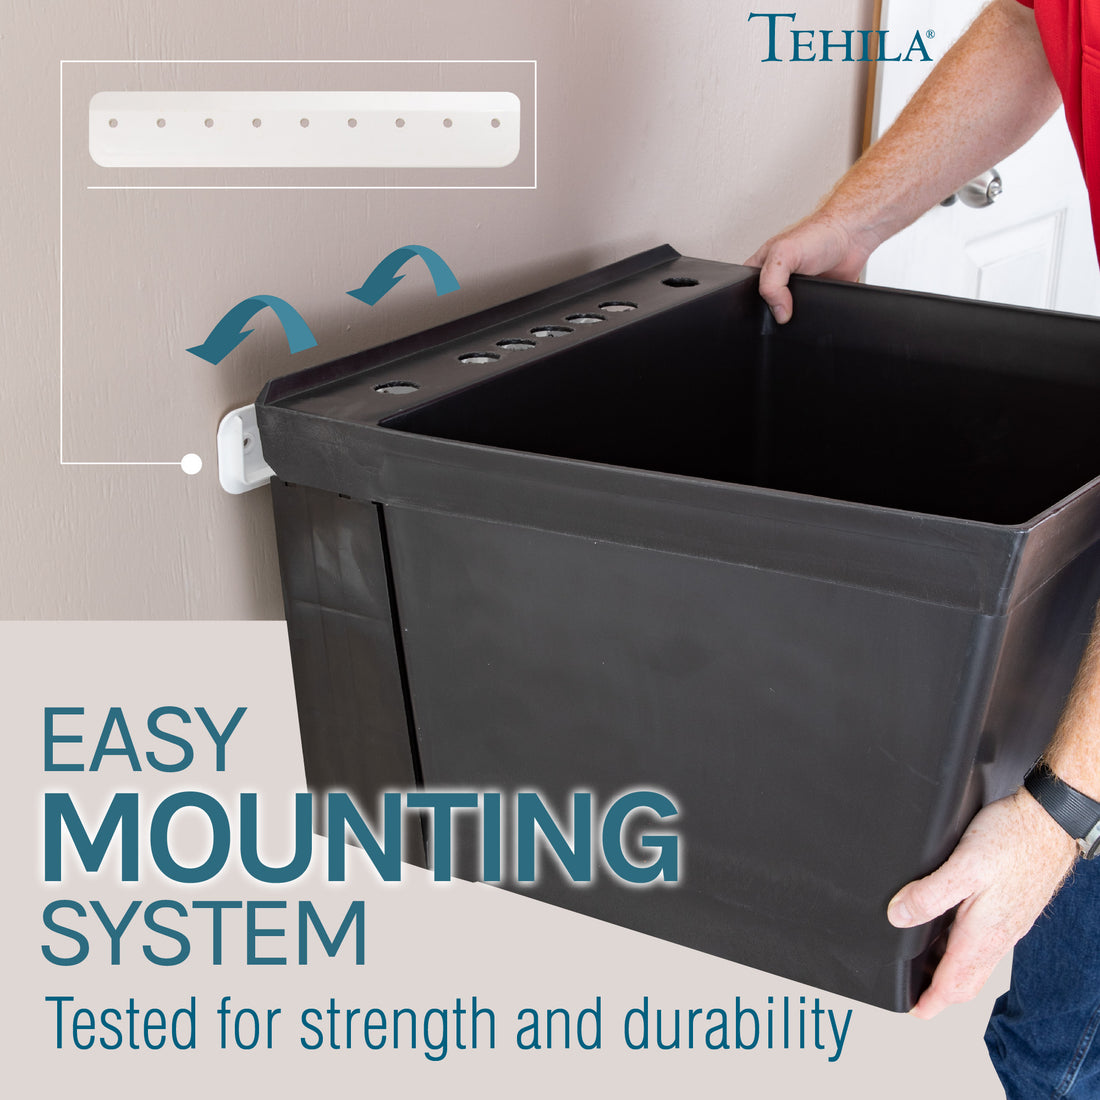 Tehila Black Standard Utility Sink Easy Mounting System Tested for strength and durability